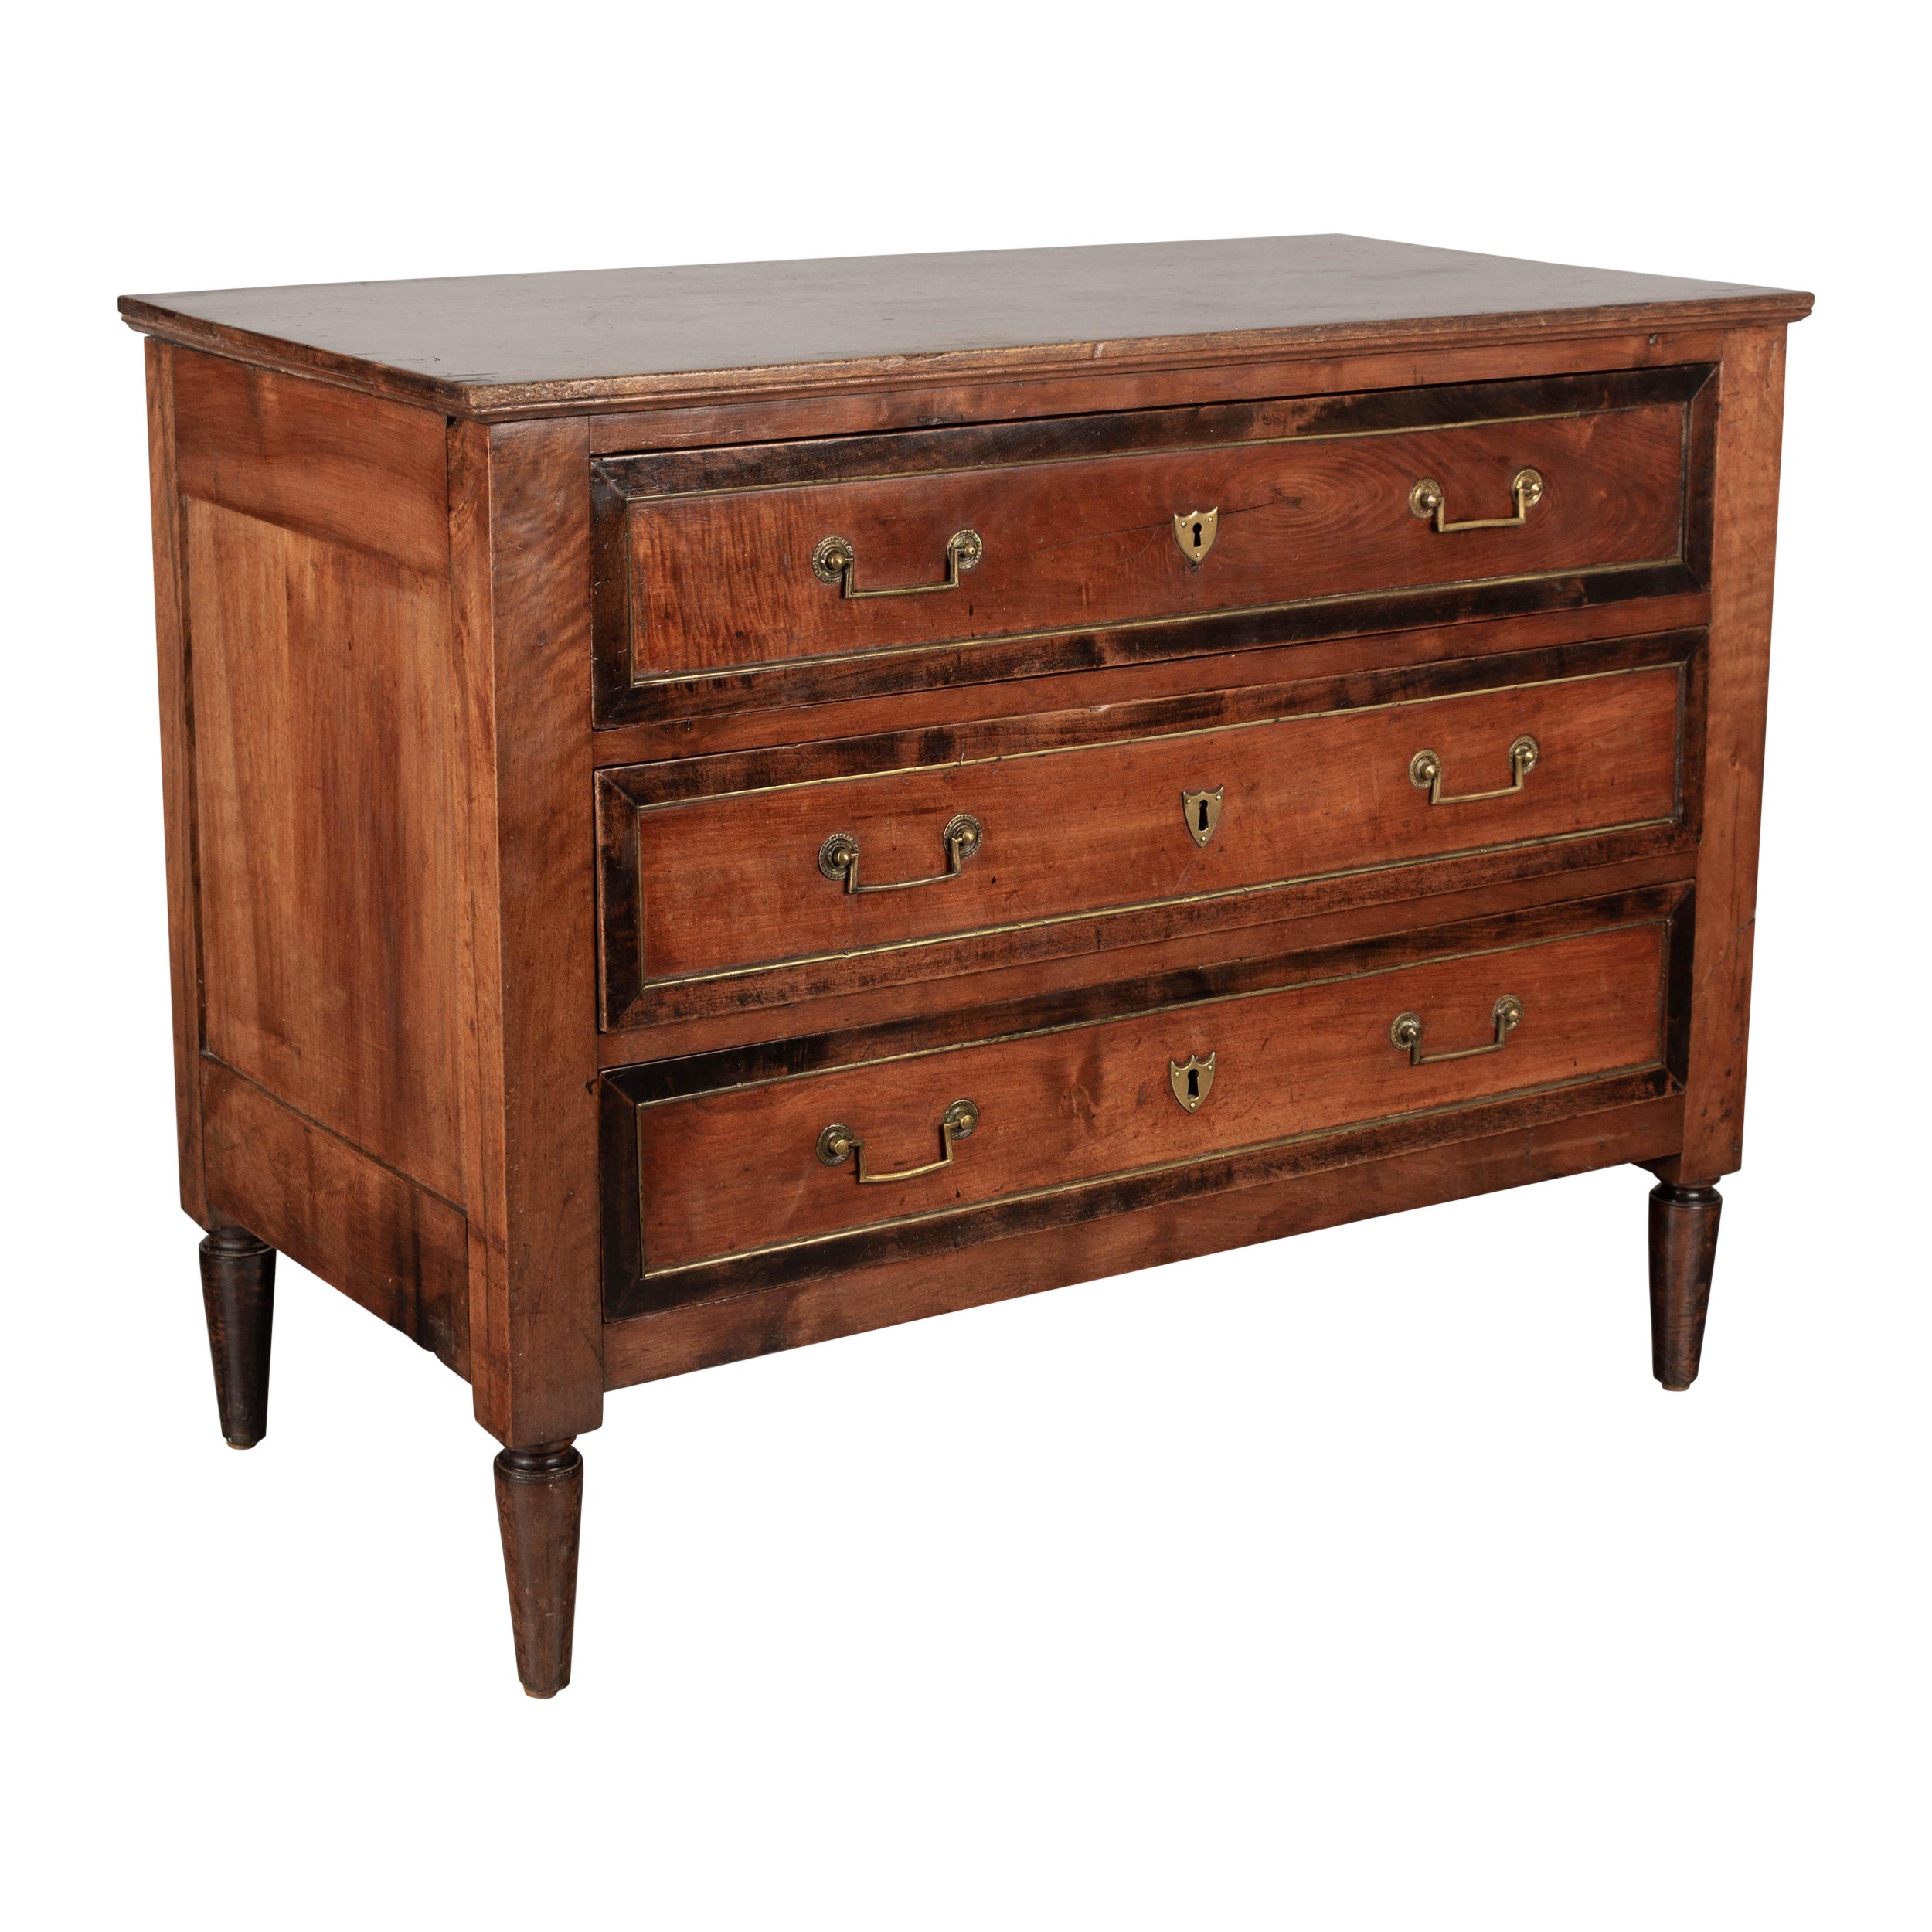 19th Century French Louis XVI Style Walnut Commode